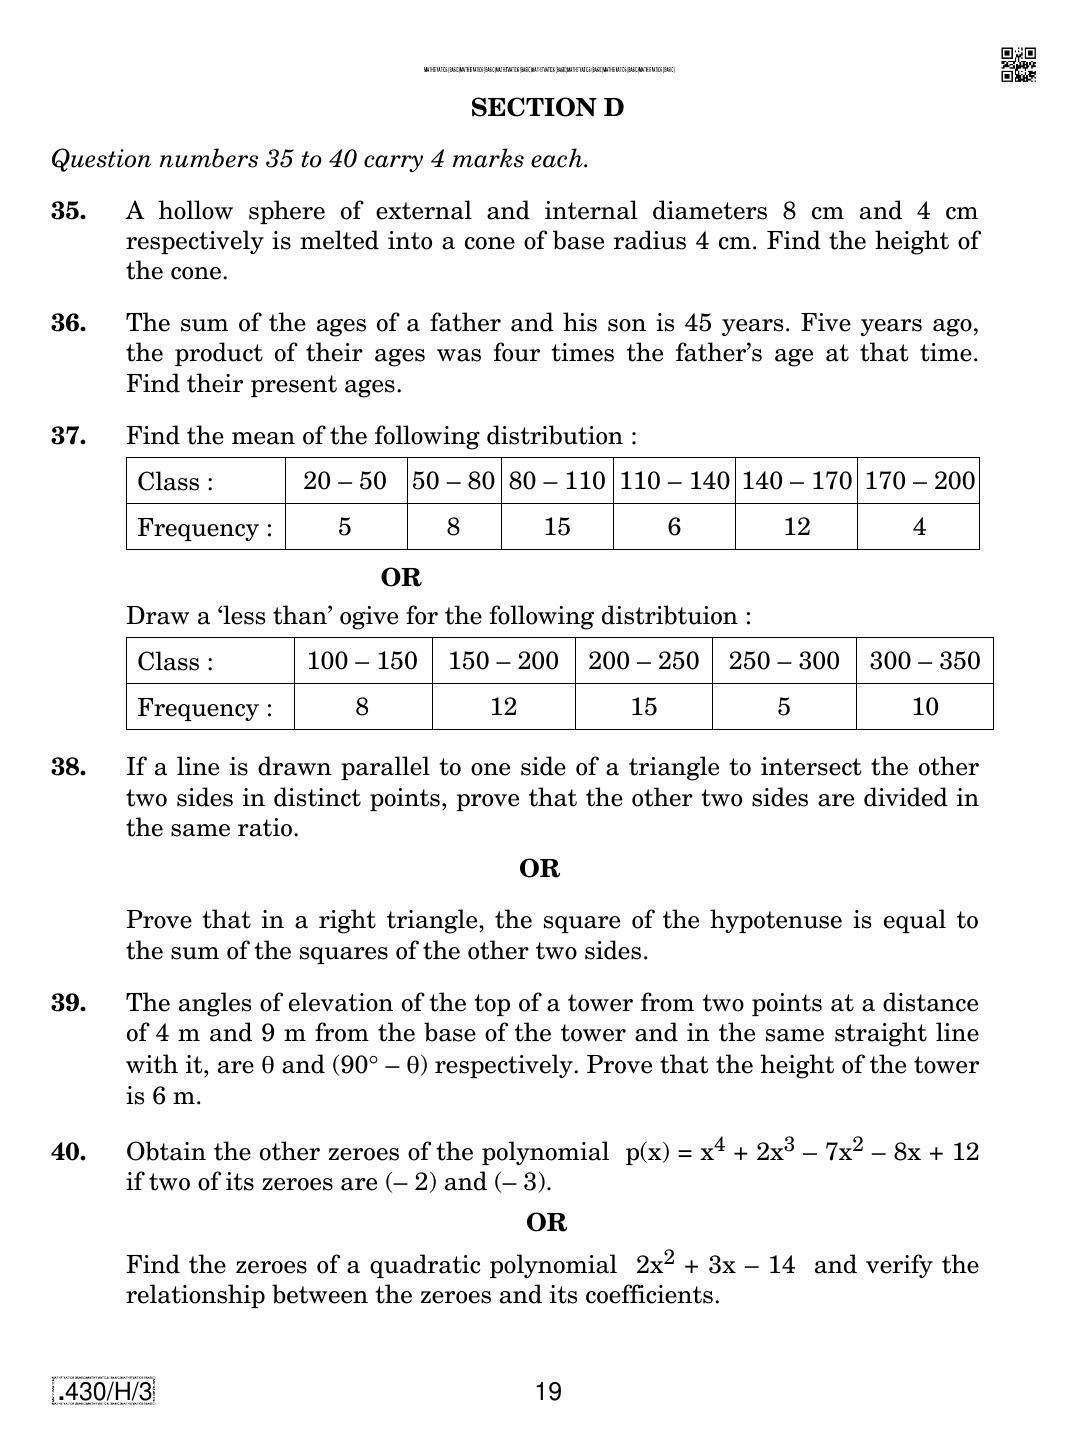 CBSE Class 10 430-C-3 - Maths (Basic) 2020 Compartment Question Paper - Page 19